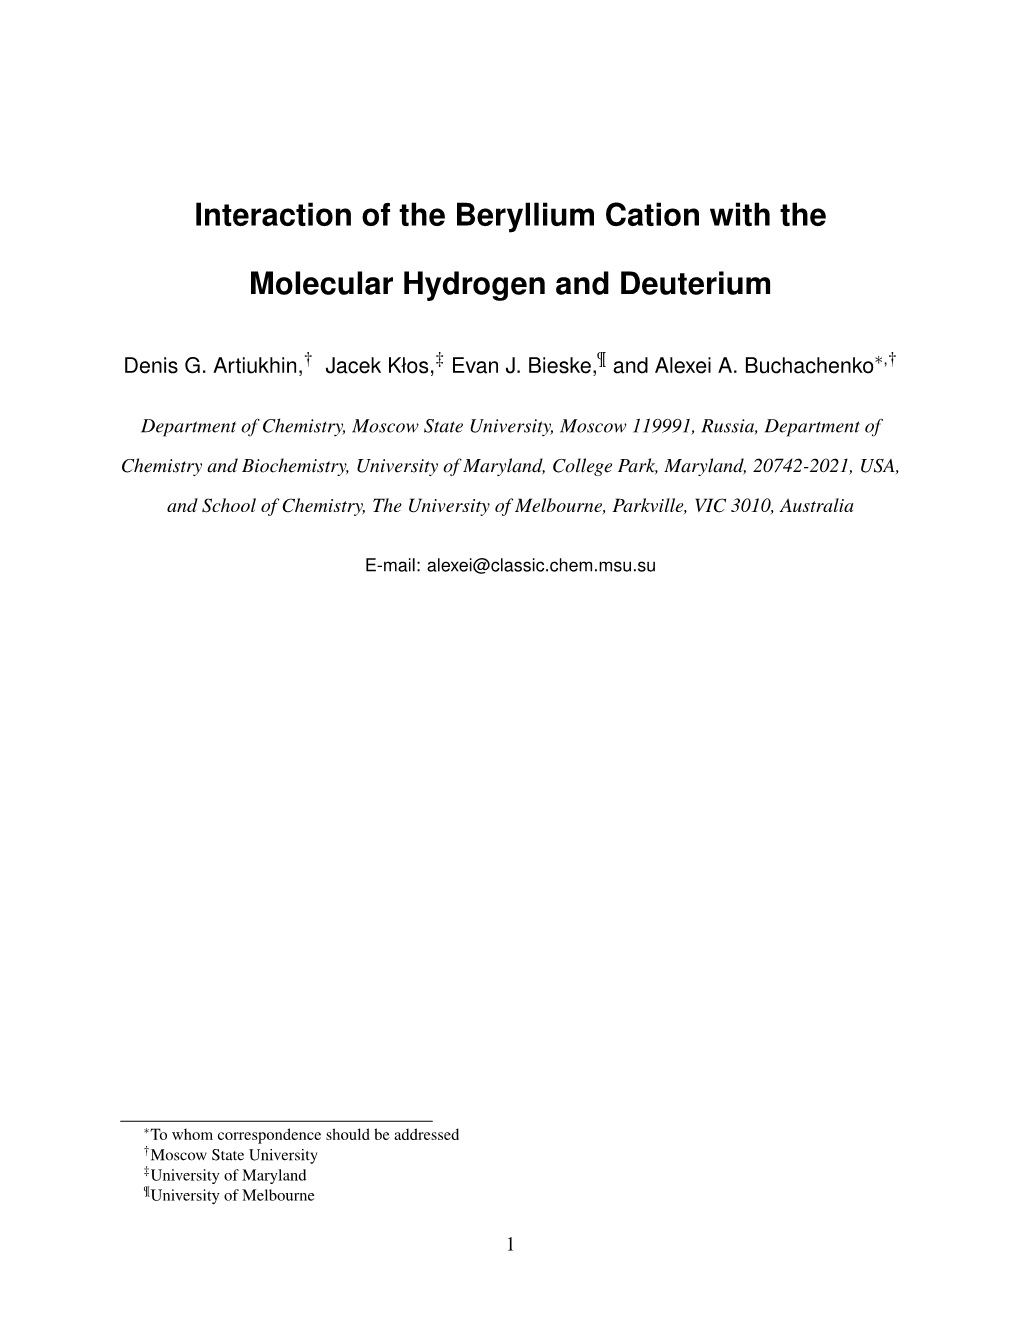 Interaction of the Beryllium Cation with the Molecular Hydrogen and Deuterium